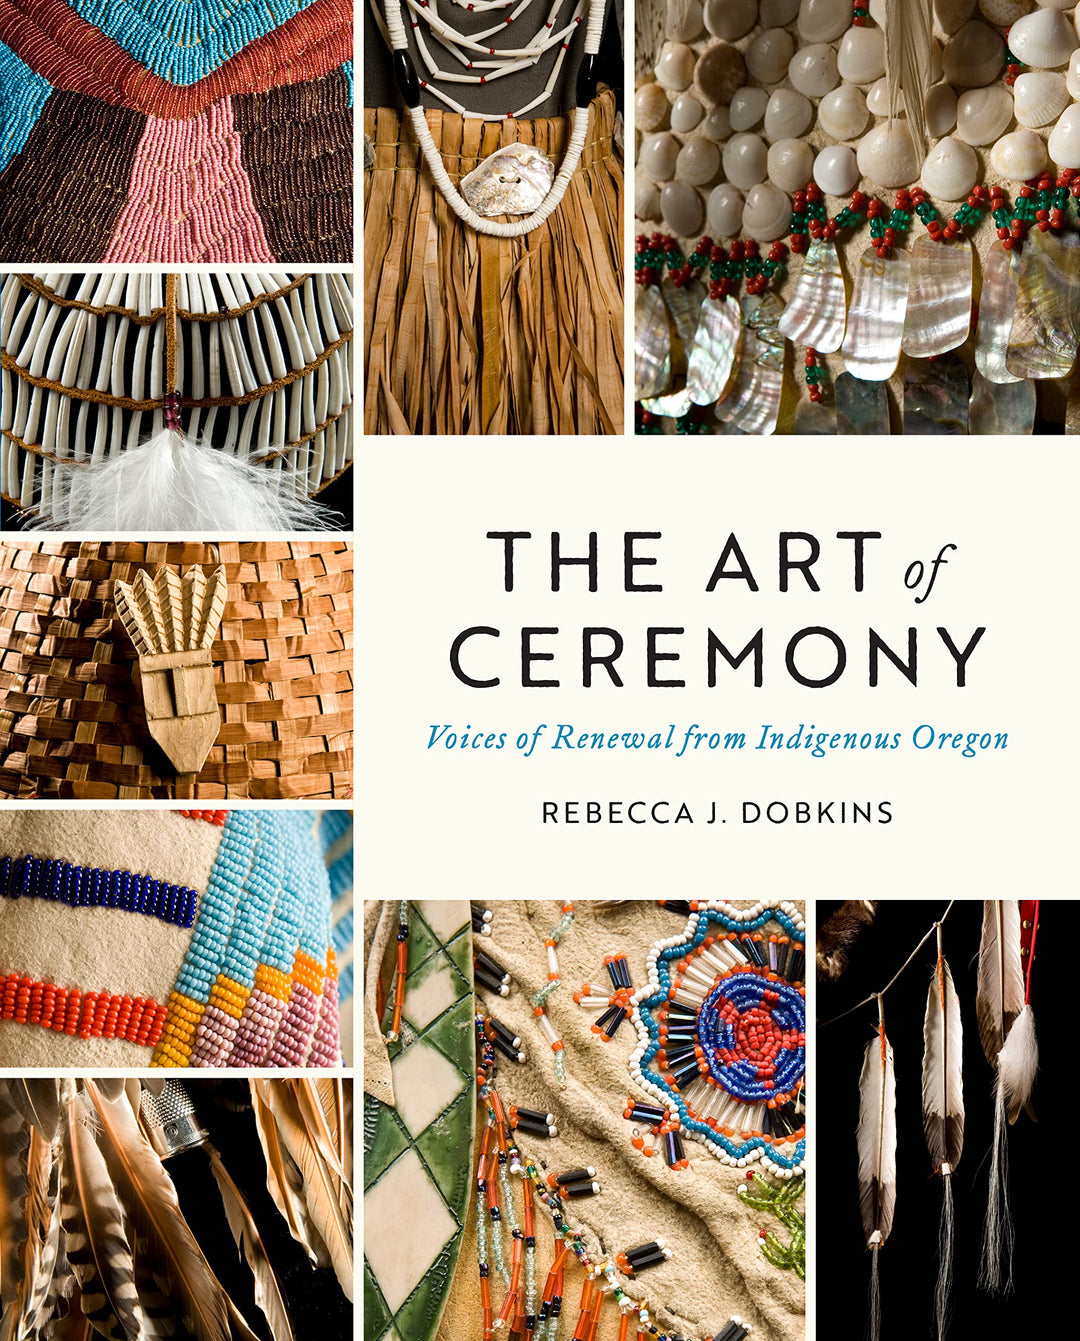 The Art of Ceremony: Voices of Renewal from Indigenous Oregon by Rebecca J. Dobkins 